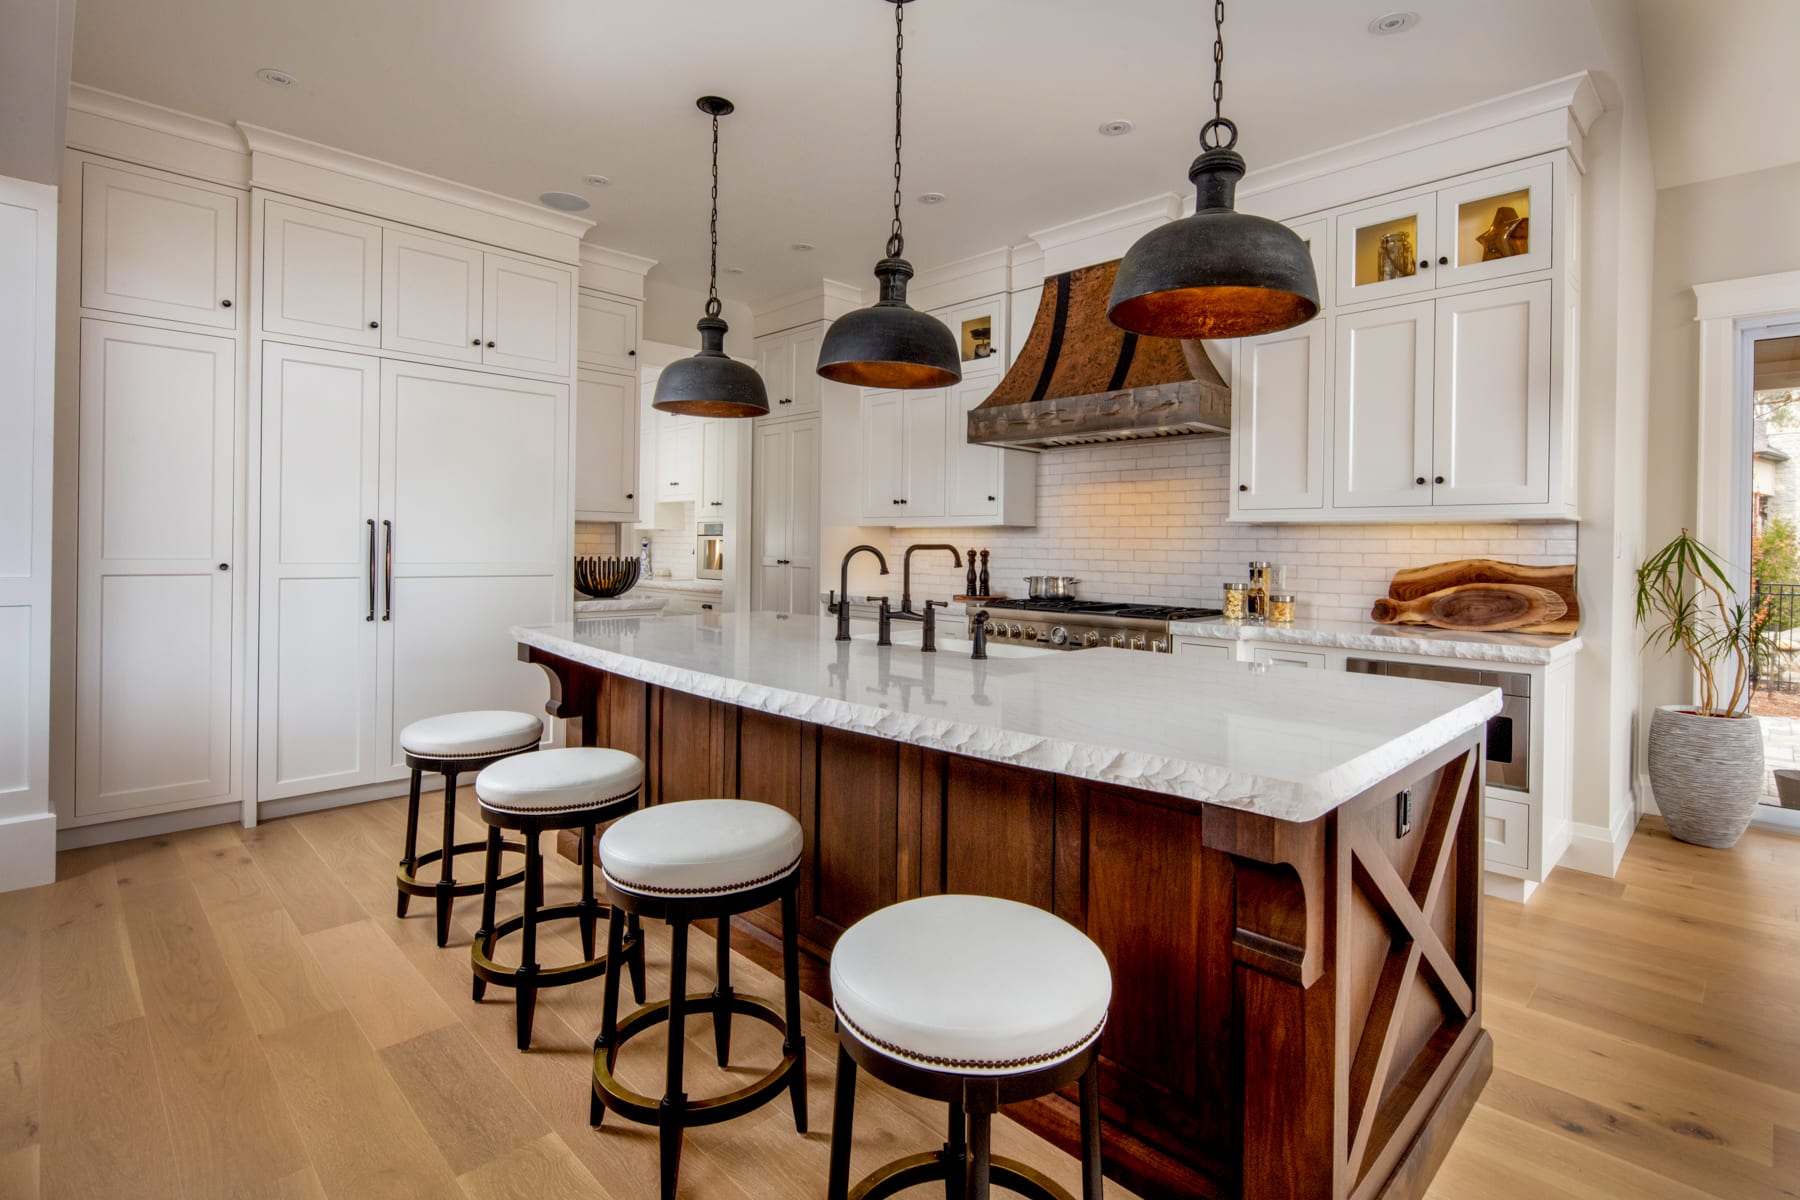 A traditional rustic custom kitchen with white cabinetry and a walnut island.